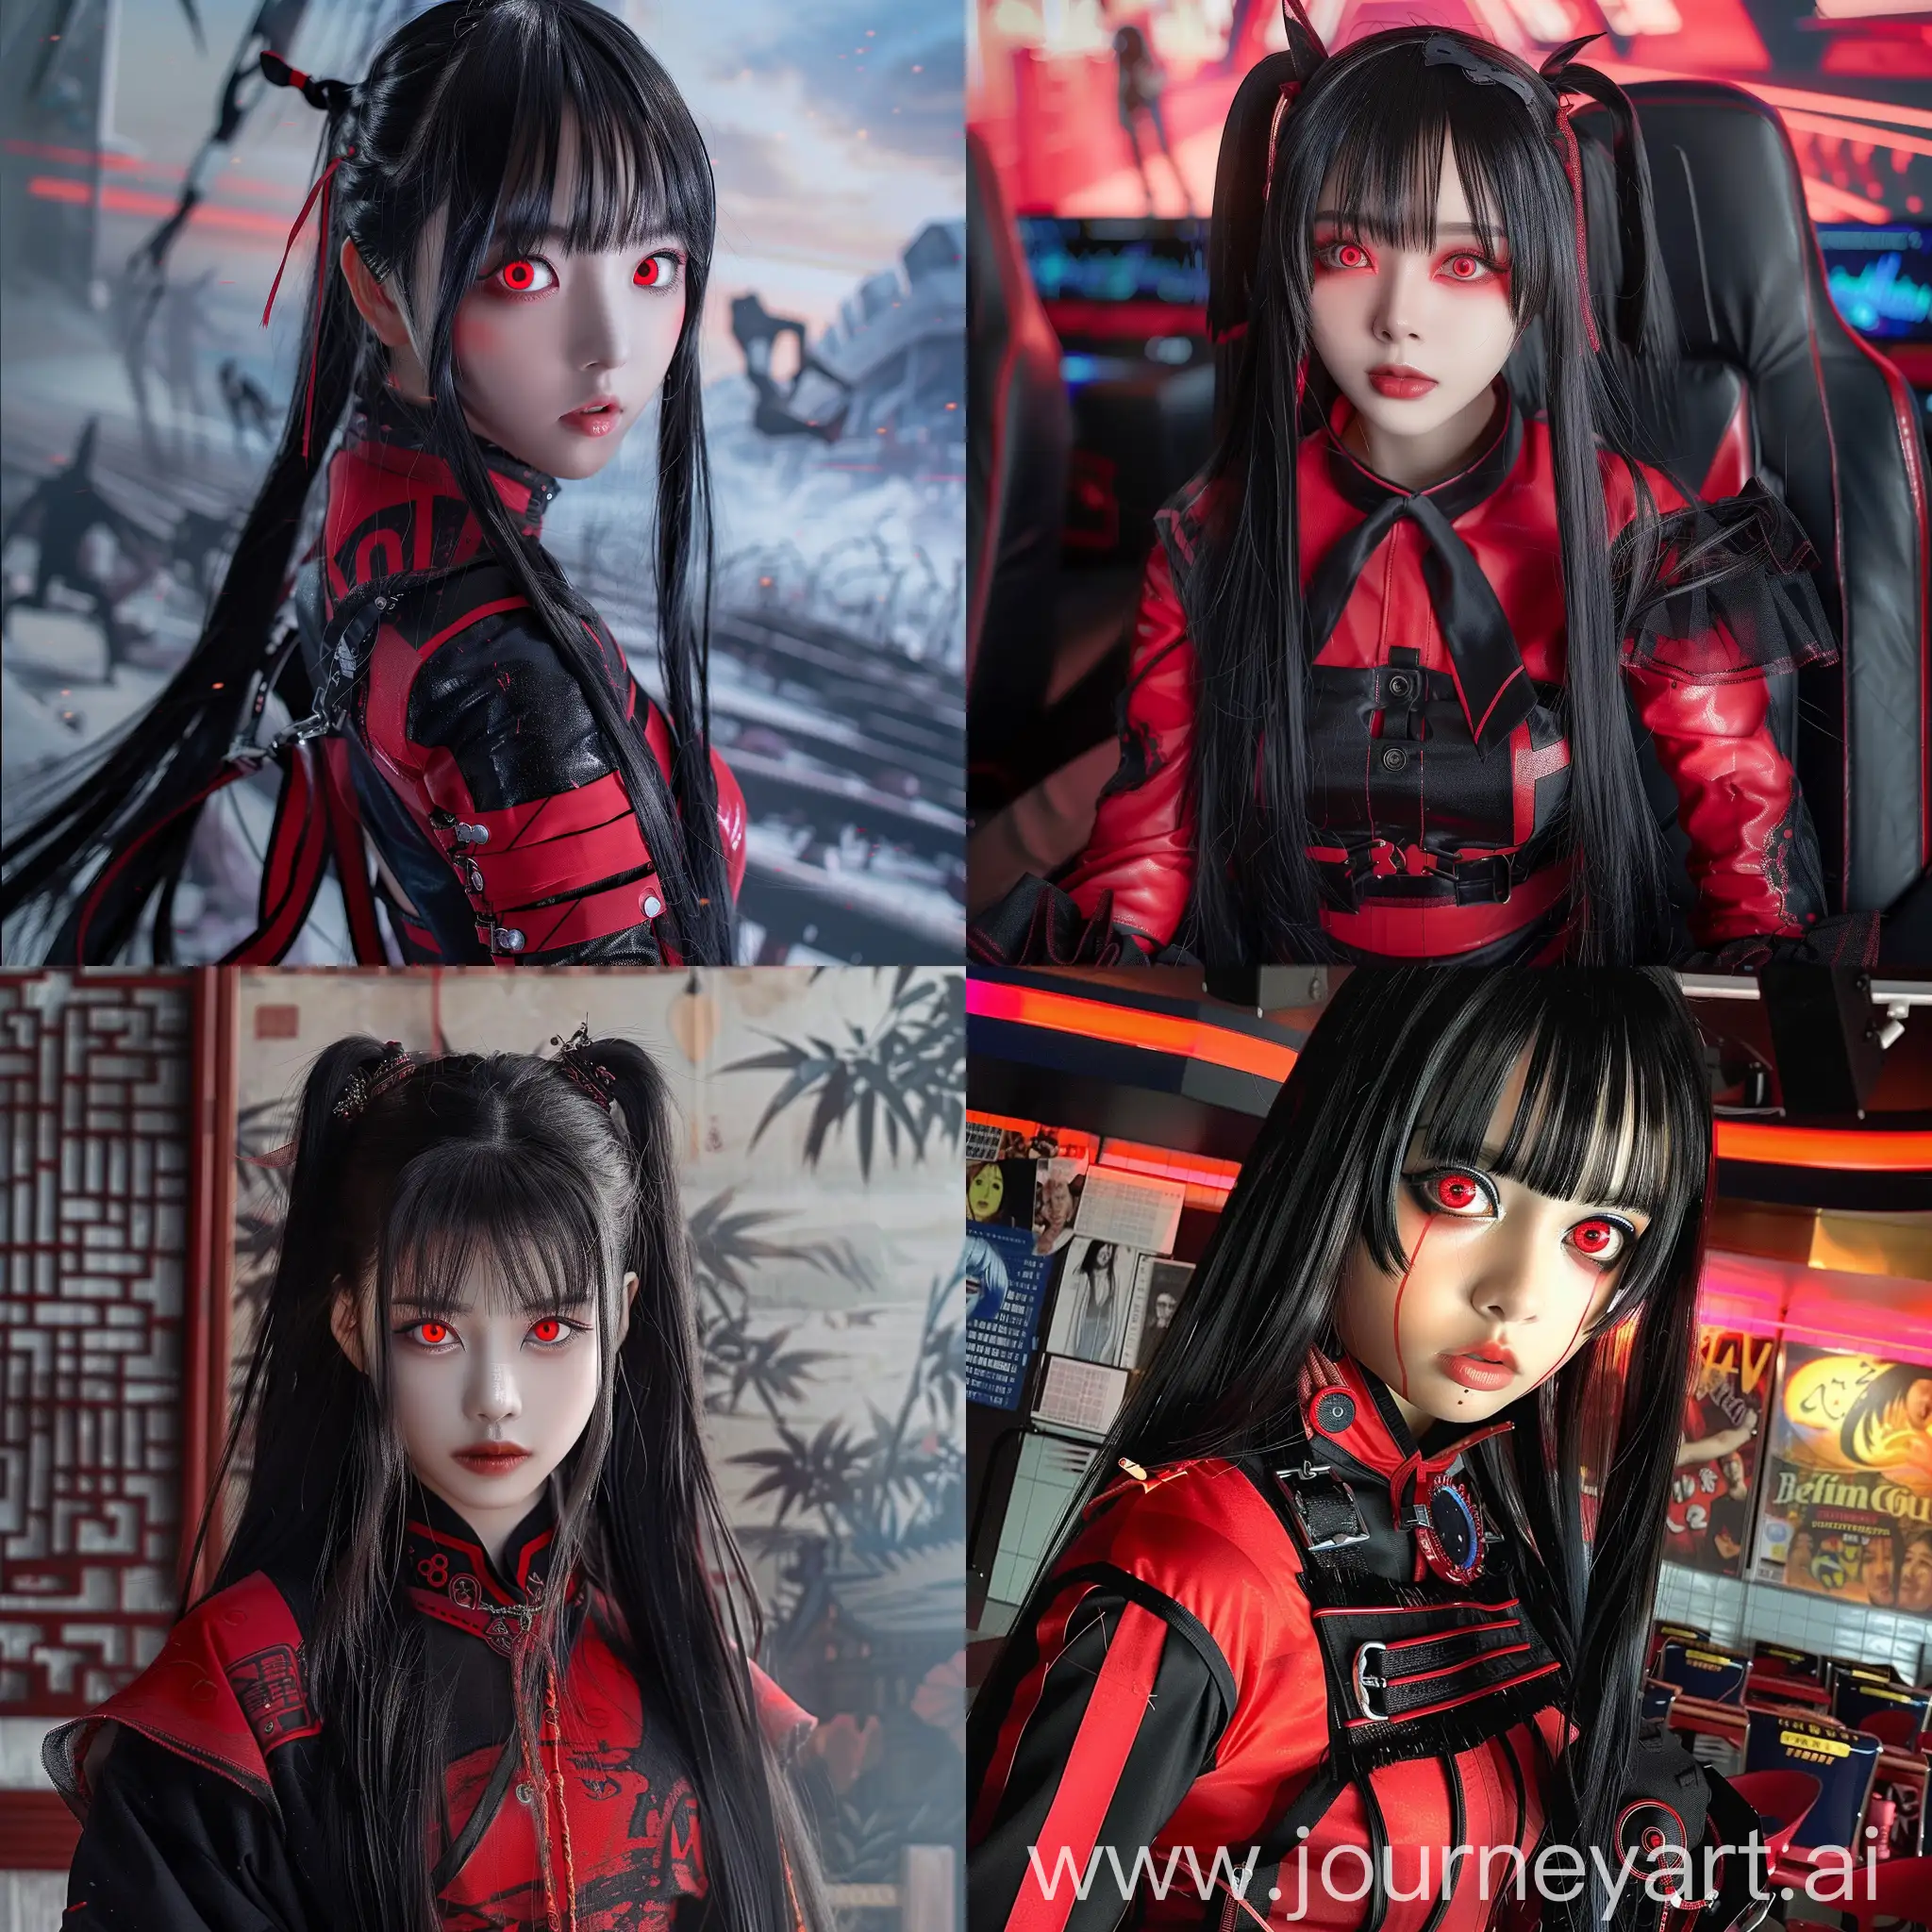 photo of a girl with long black hair, bright red eyes, red and black outfit, the background is a movie